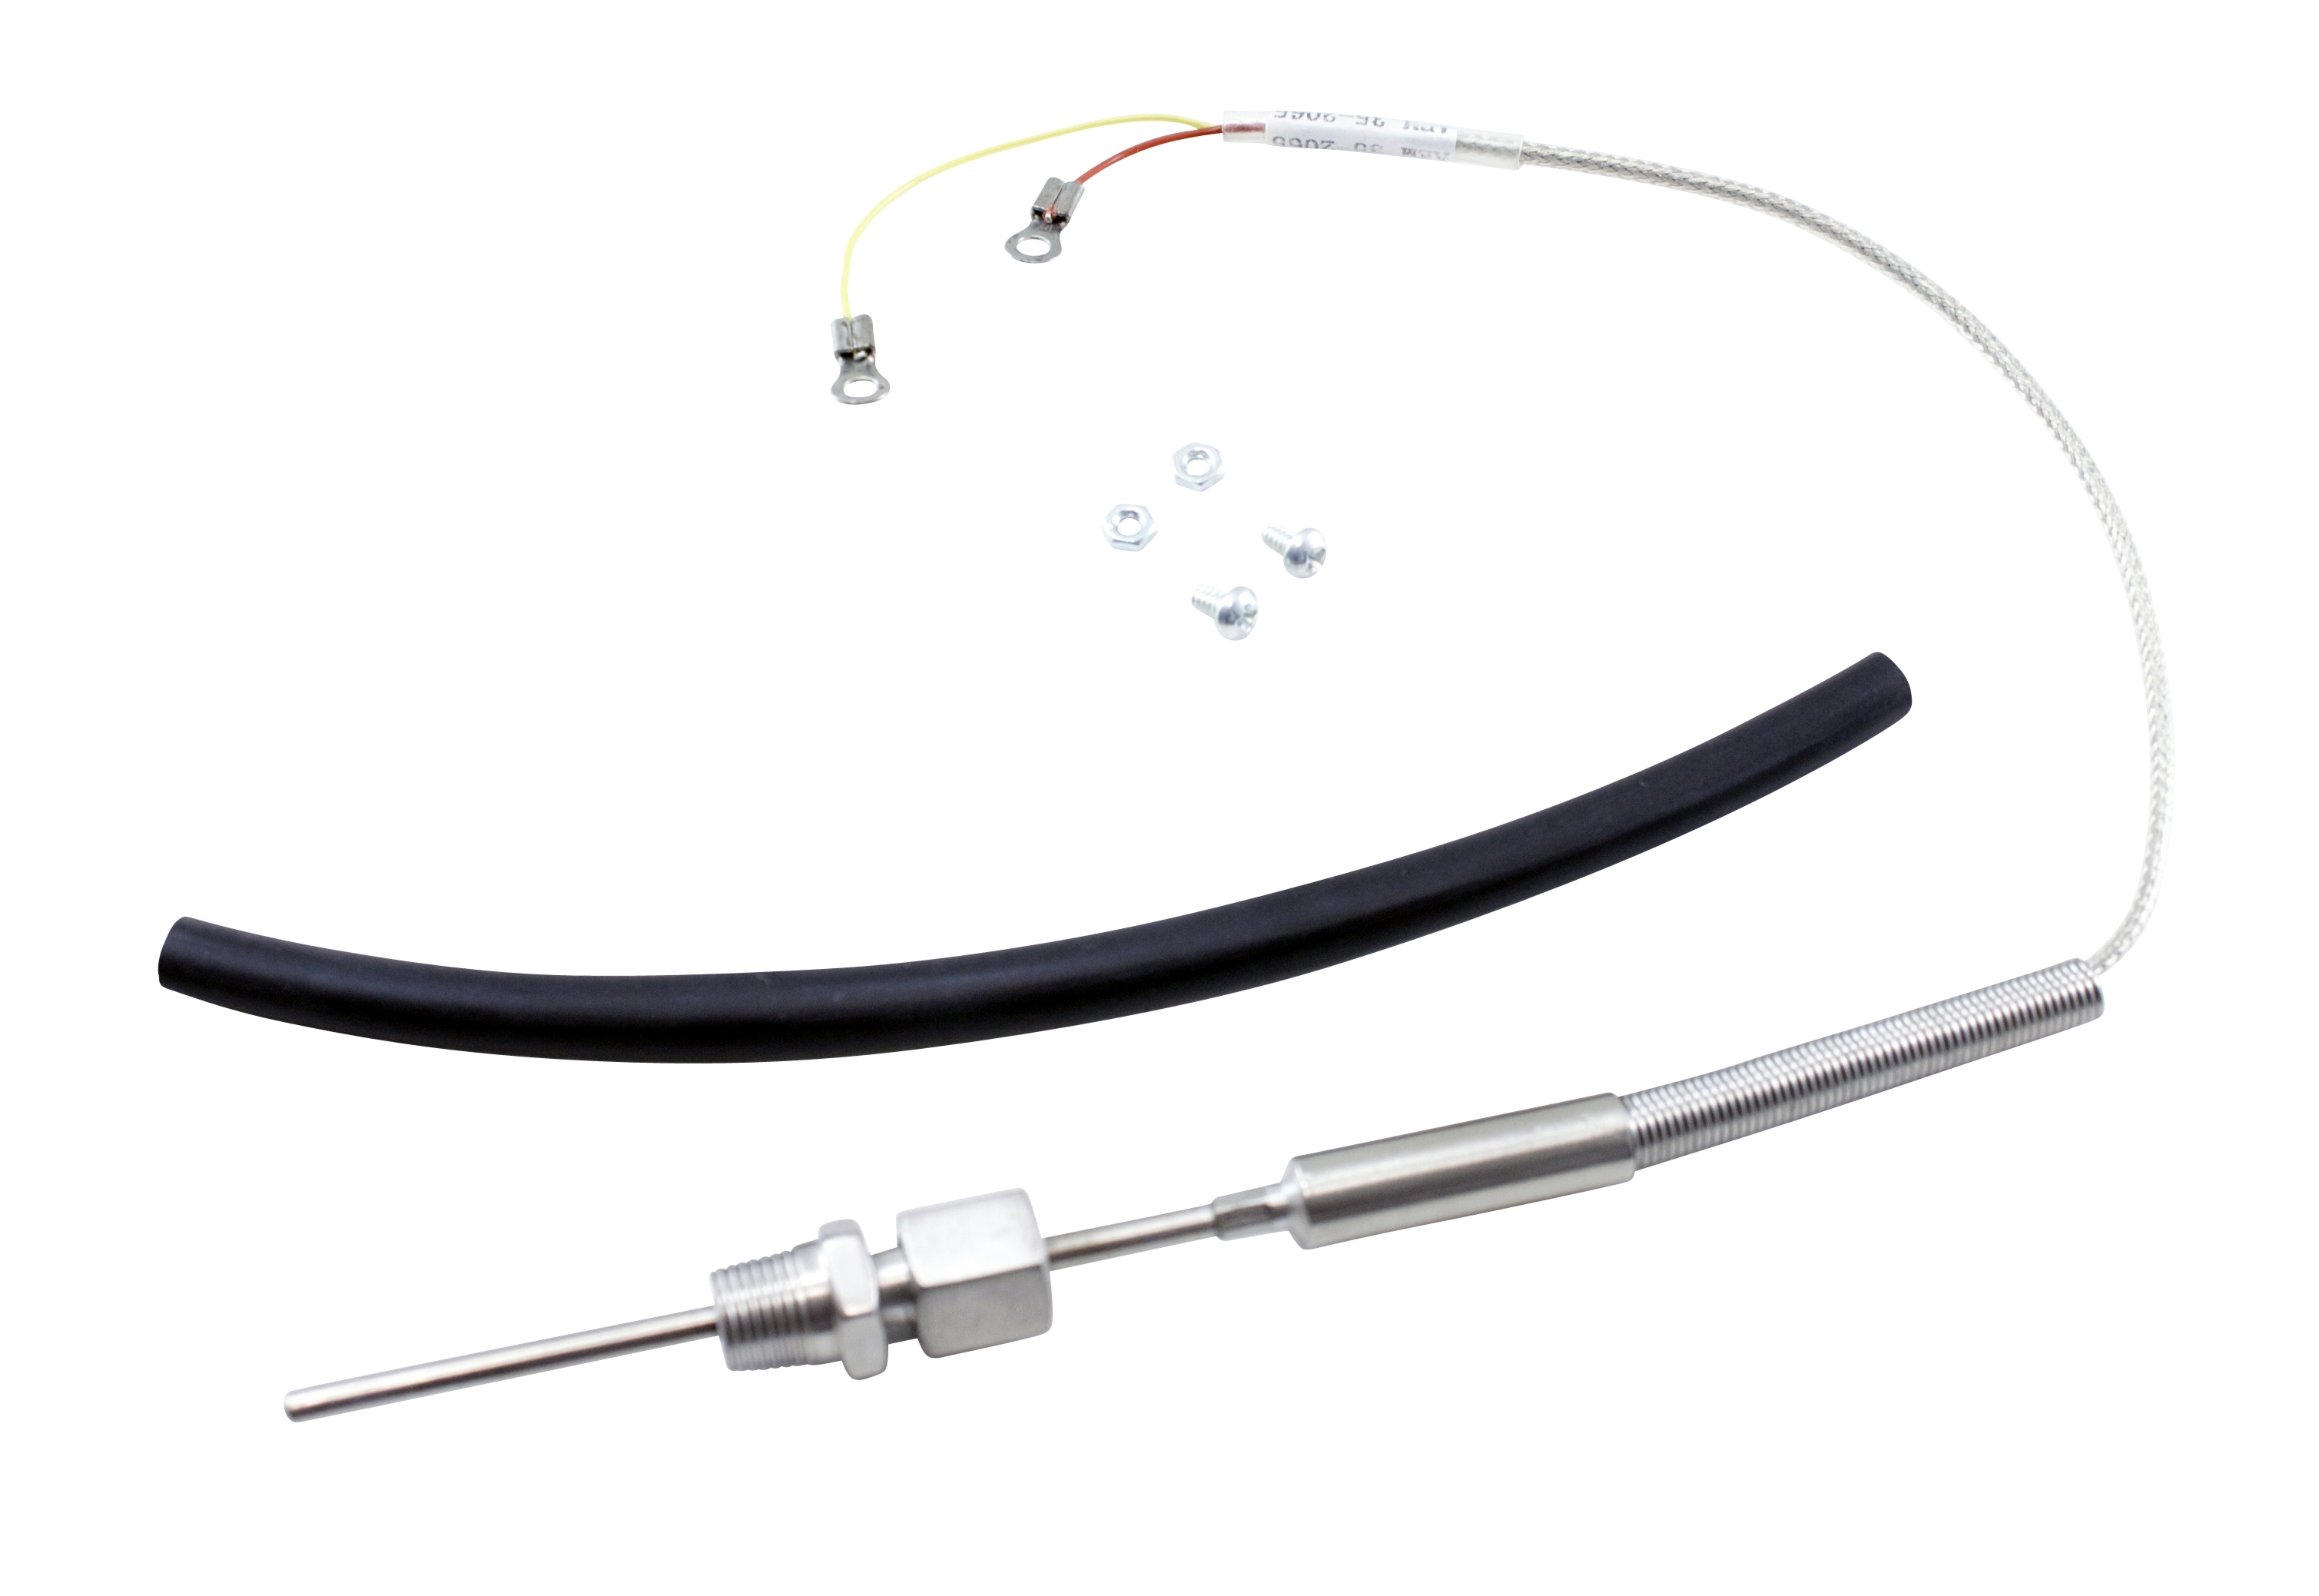 AEM K-Type Closed Tip Thermocouple Sensor Kit. Inconel Sheath. 1/8" NPT Compression Fitting. Includes: K-Type Closed Thermocouple Sensor, 1/8" Compression Fitting & Ring Terminal Harness